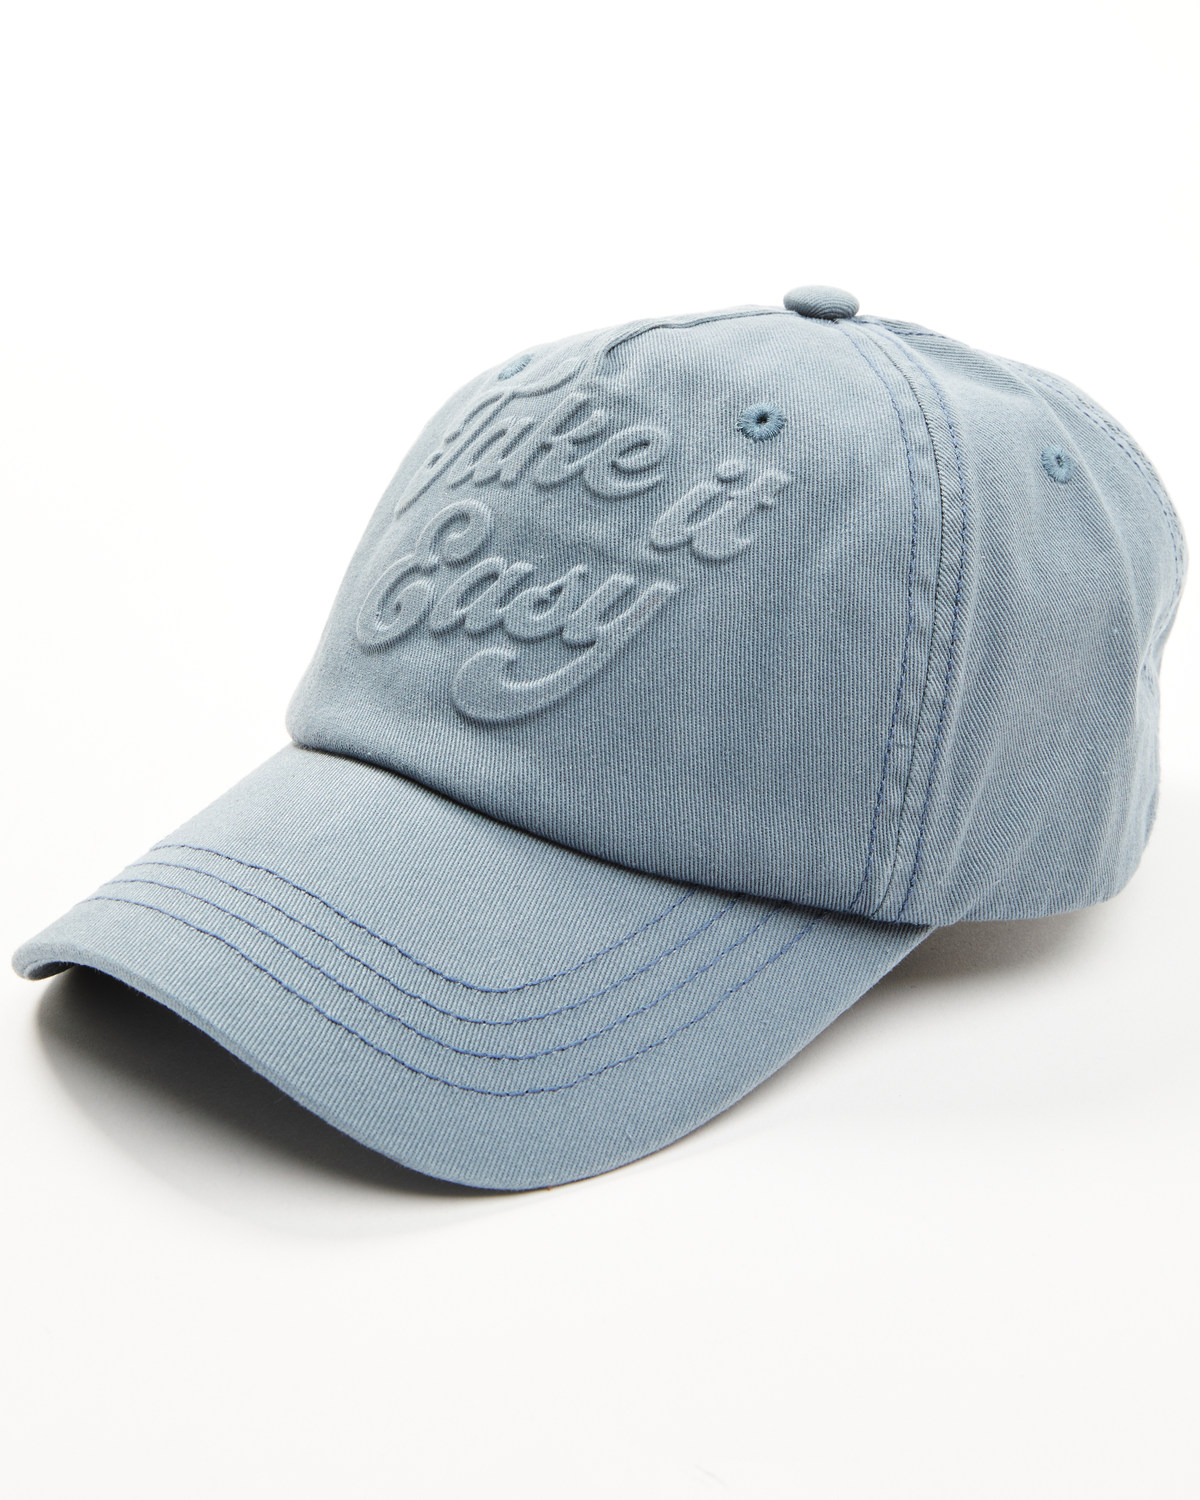 Cleo + Wolf Women's Take It Easy Embossed Ball Cap